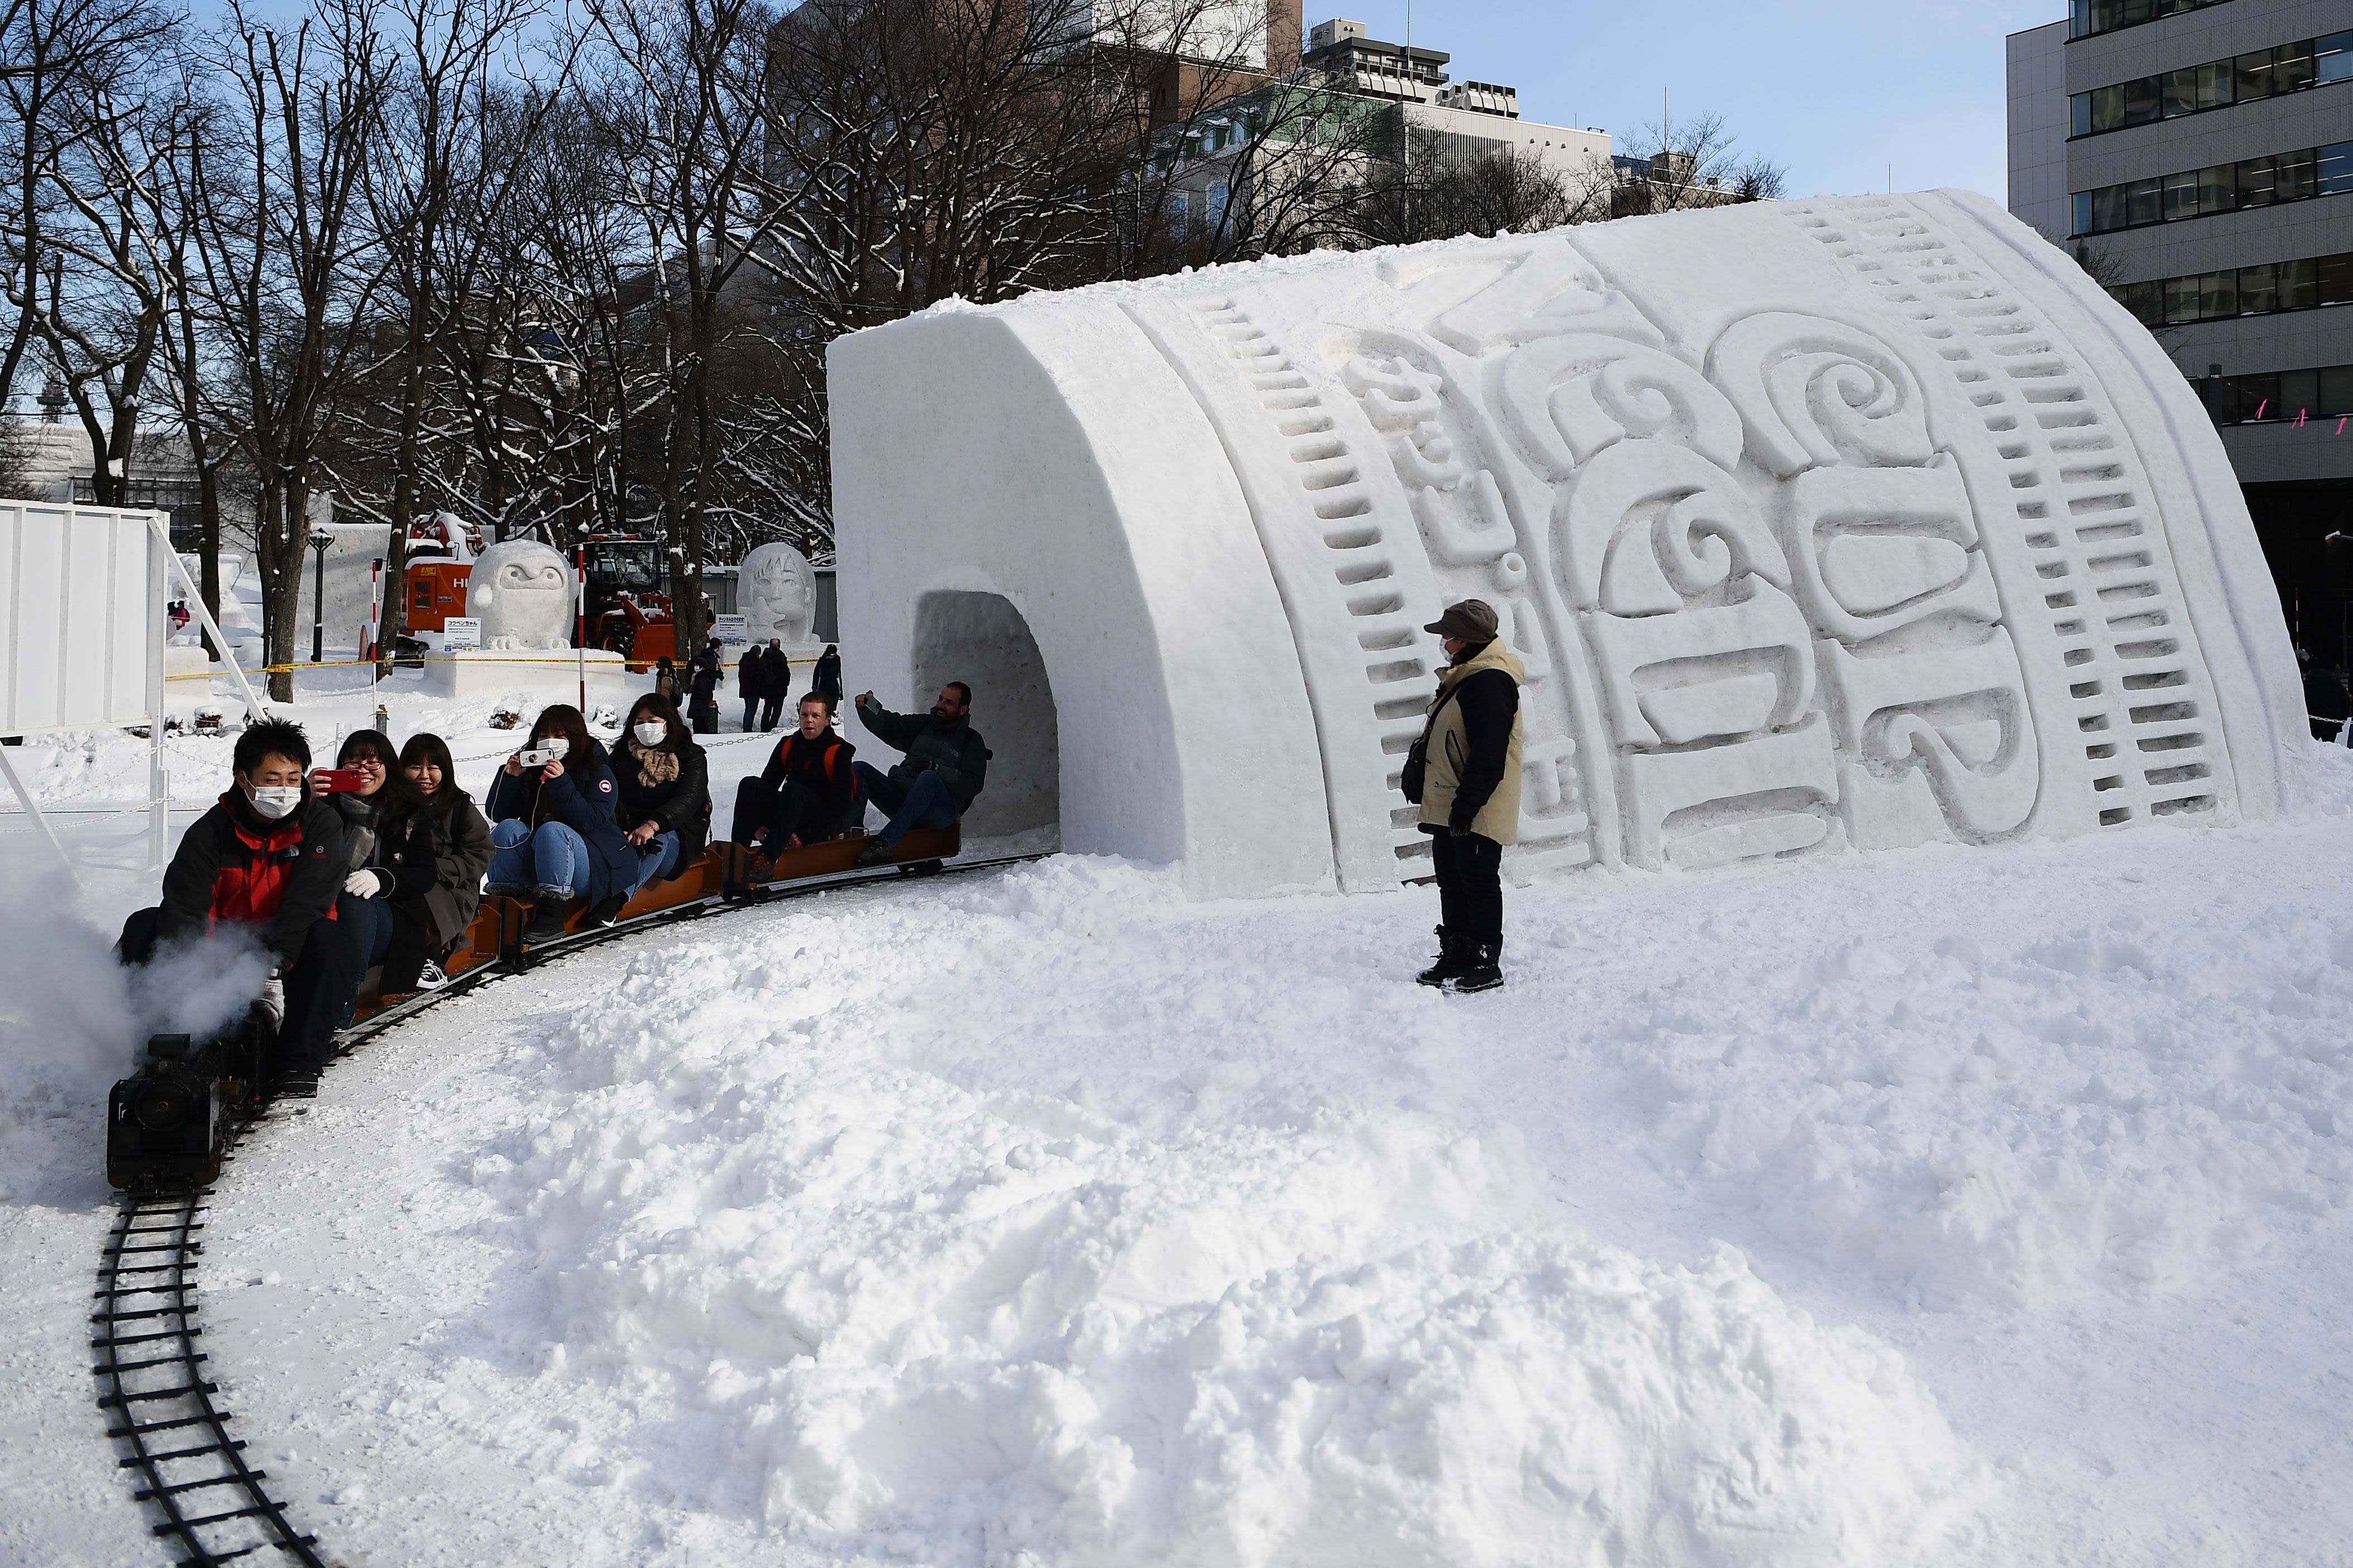 Japan's Sapporo Snow Festival had to import its snow this year | CNN